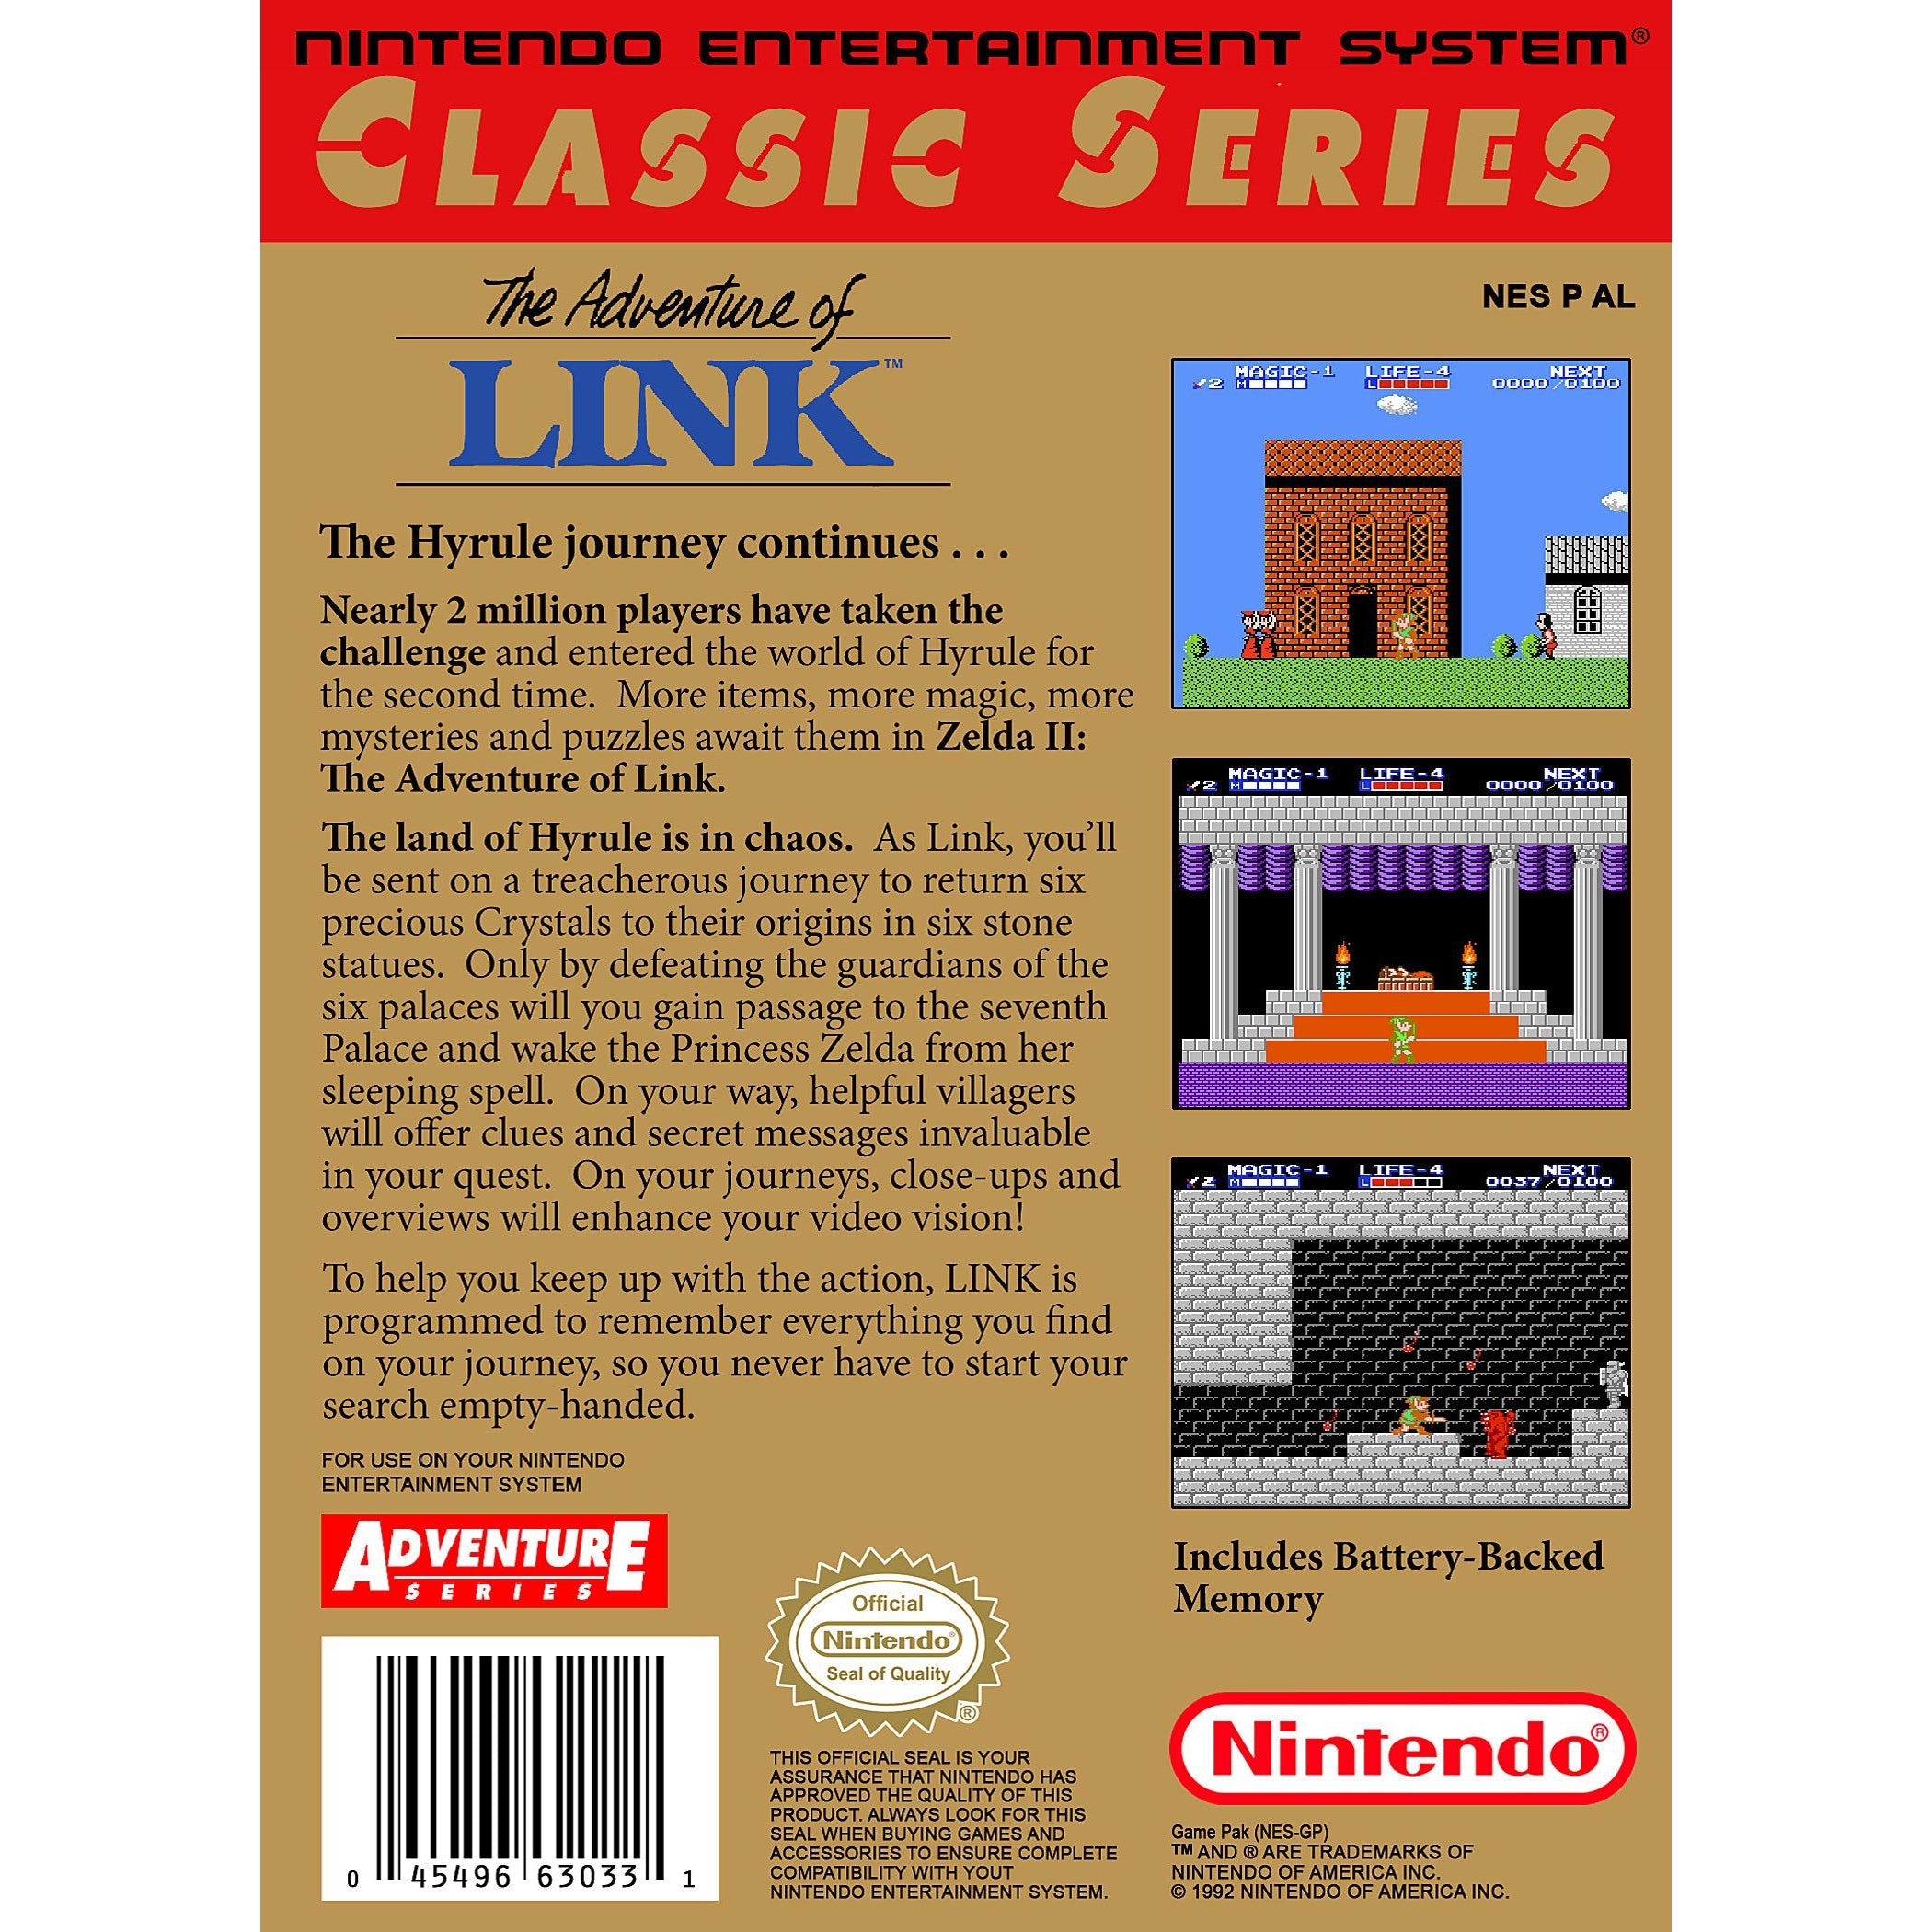 Zelda II: The Adventure of Link (Gray Cart) - Authentic NES Game Cartridge - YourGamingShop.com - Buy, Sell, Trade Video Games Online. 120 Day Warranty. Satisfaction Guaranteed.